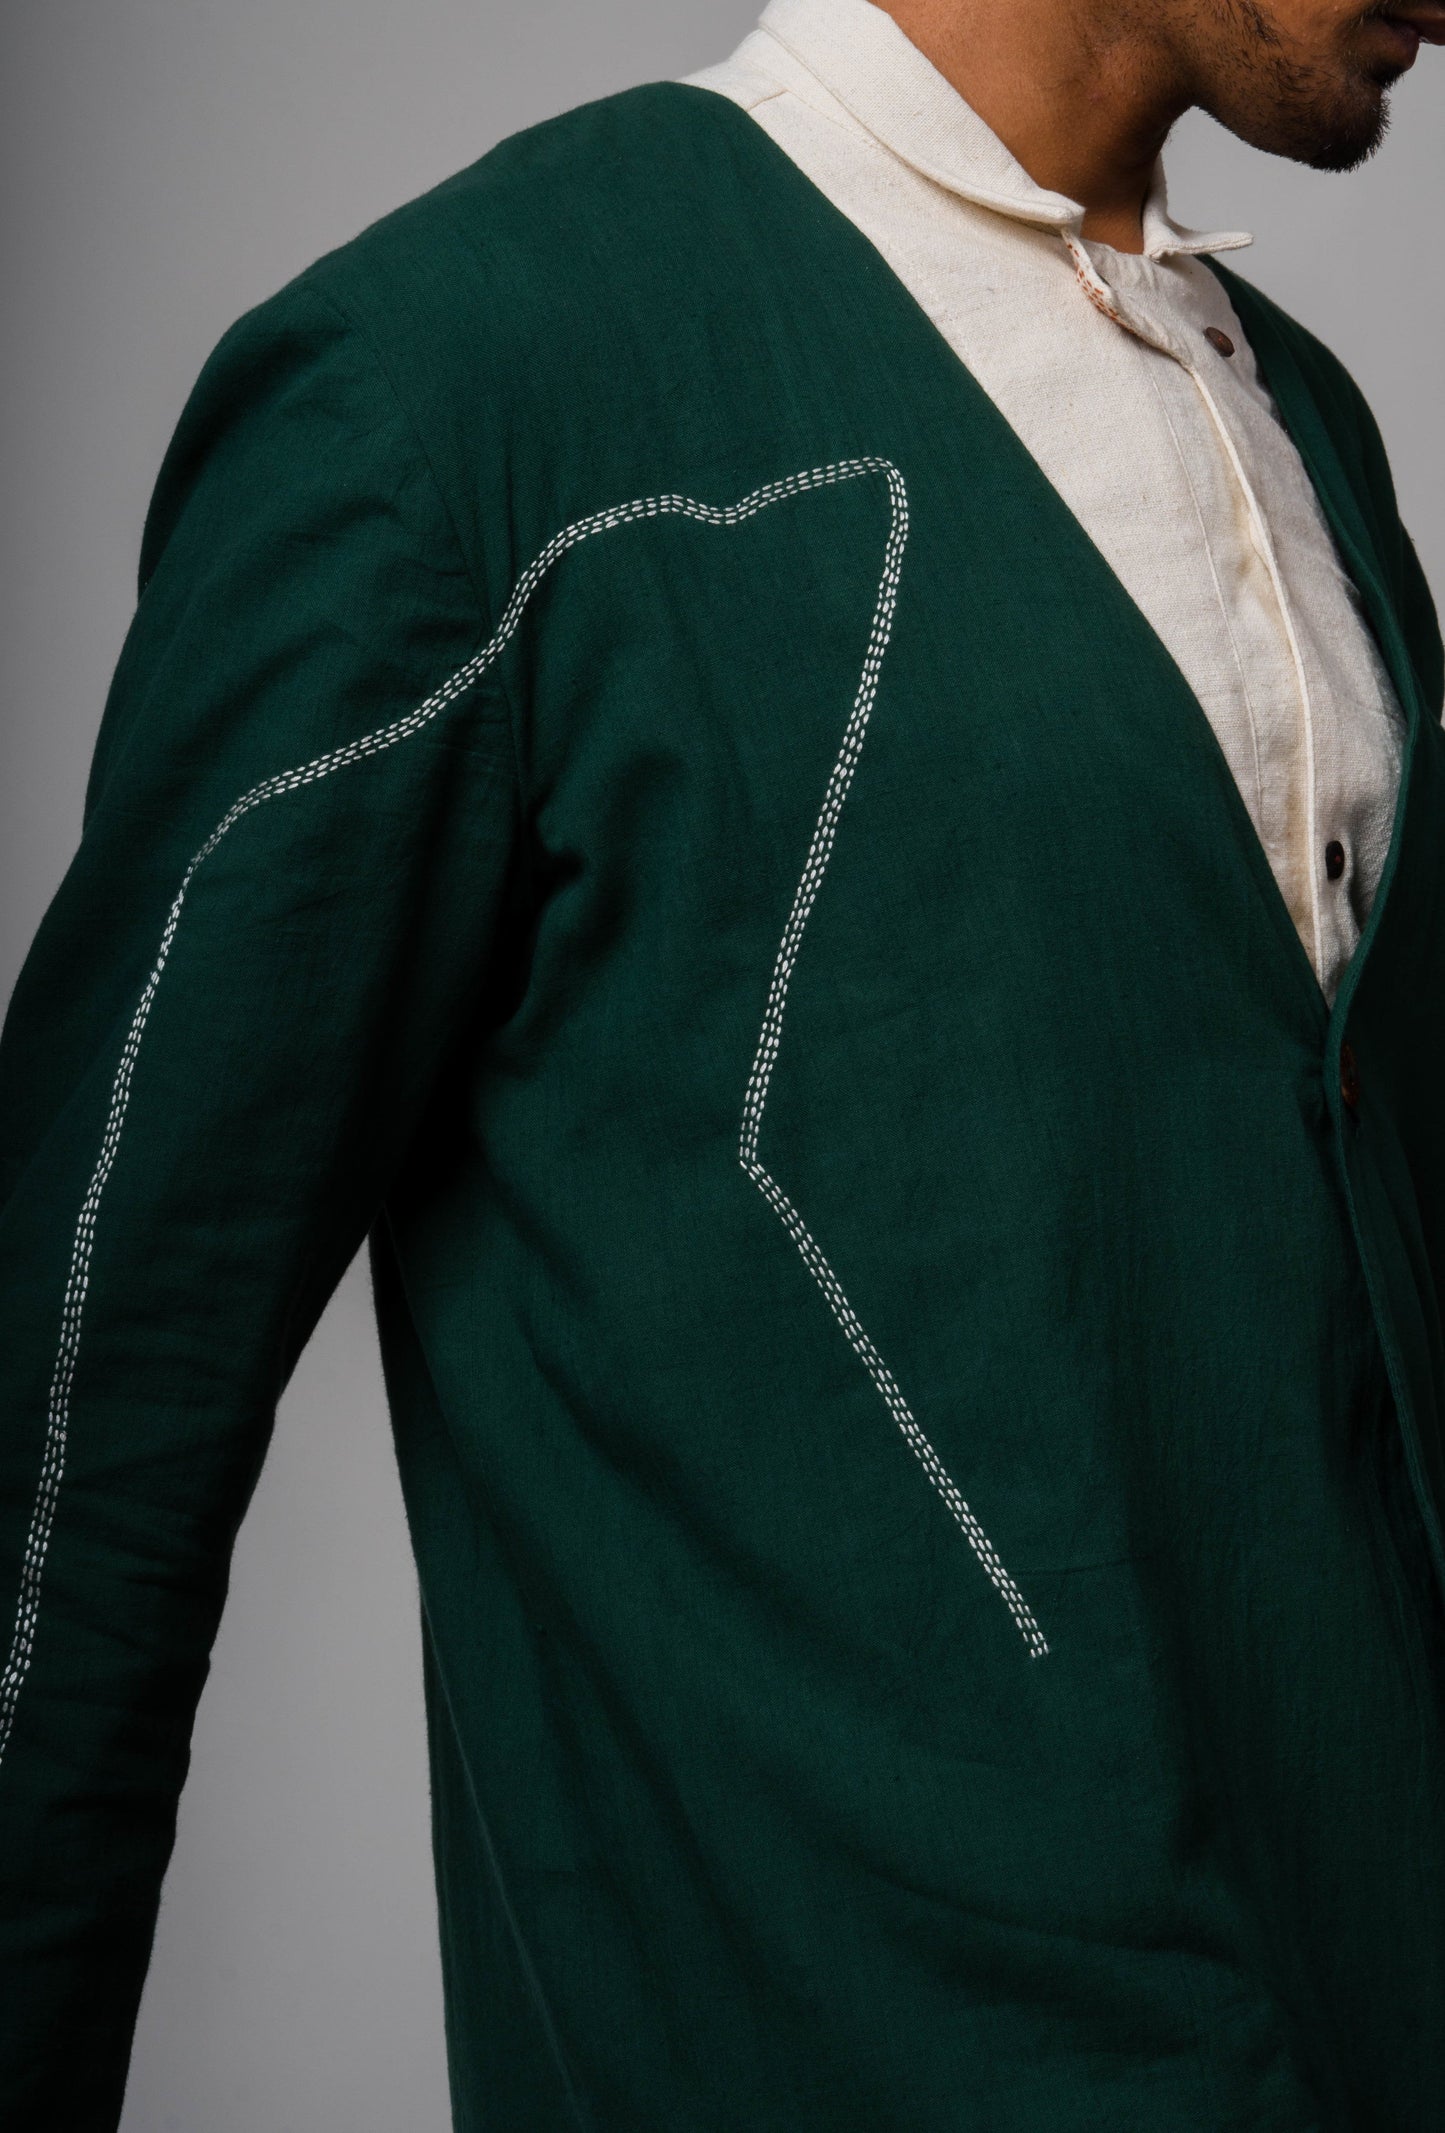 Green Embroidered Jacket at Kamakhyaa by Lafaani. This item is Casual Wear, Cotton, For Him, Green, Jackets, Mens Overlay, Menswear, Natural, Relaxed Fit, Solids